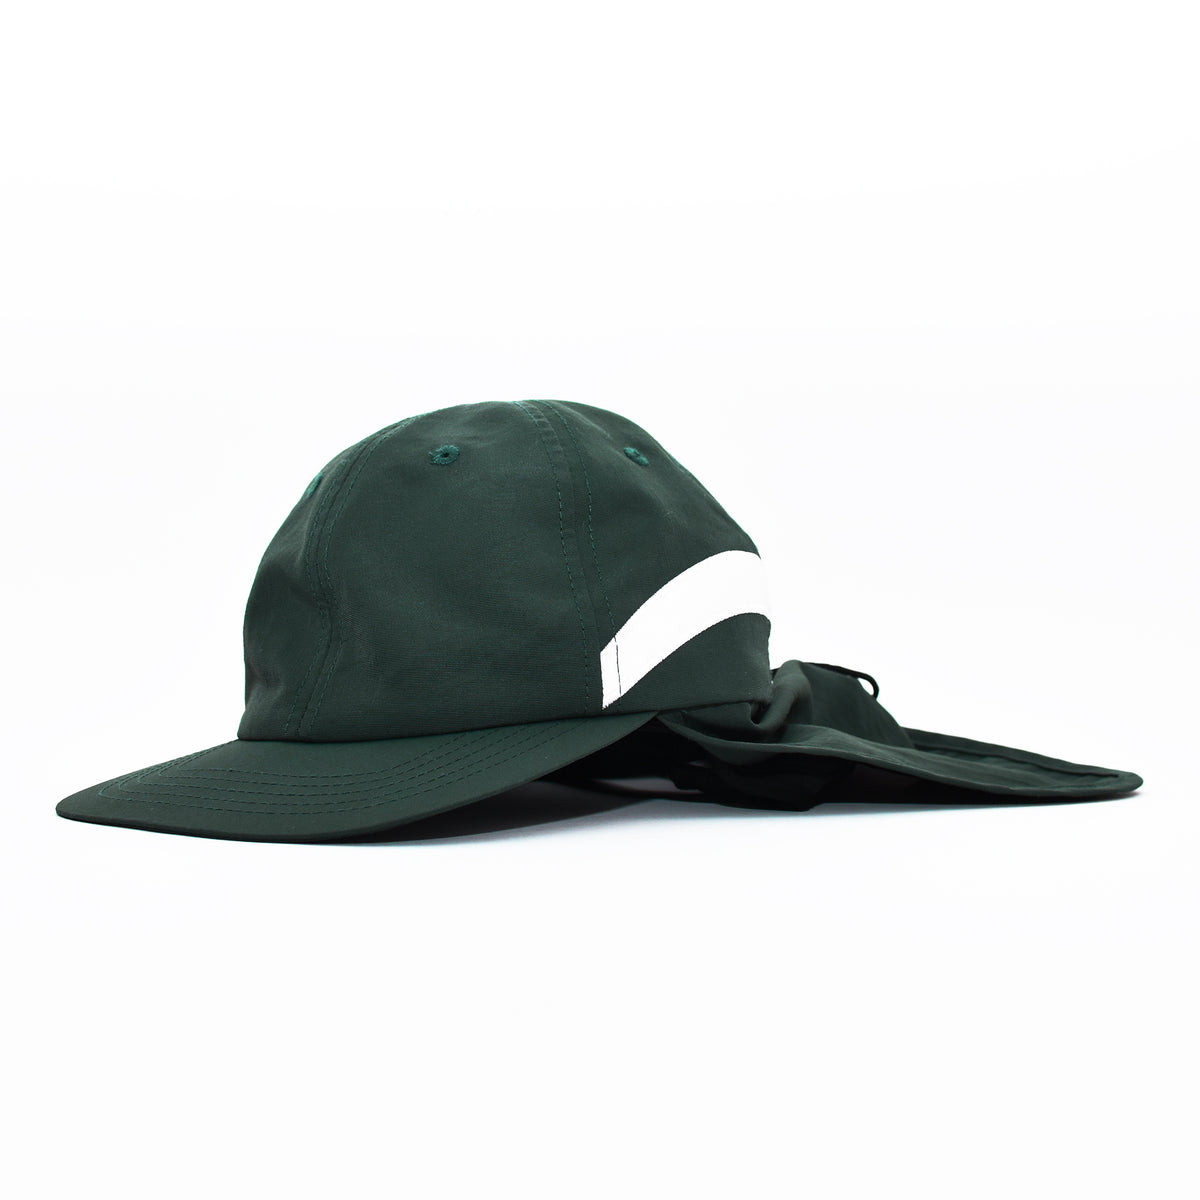 Solid color quick-drying baseball cap sport travel shade sun